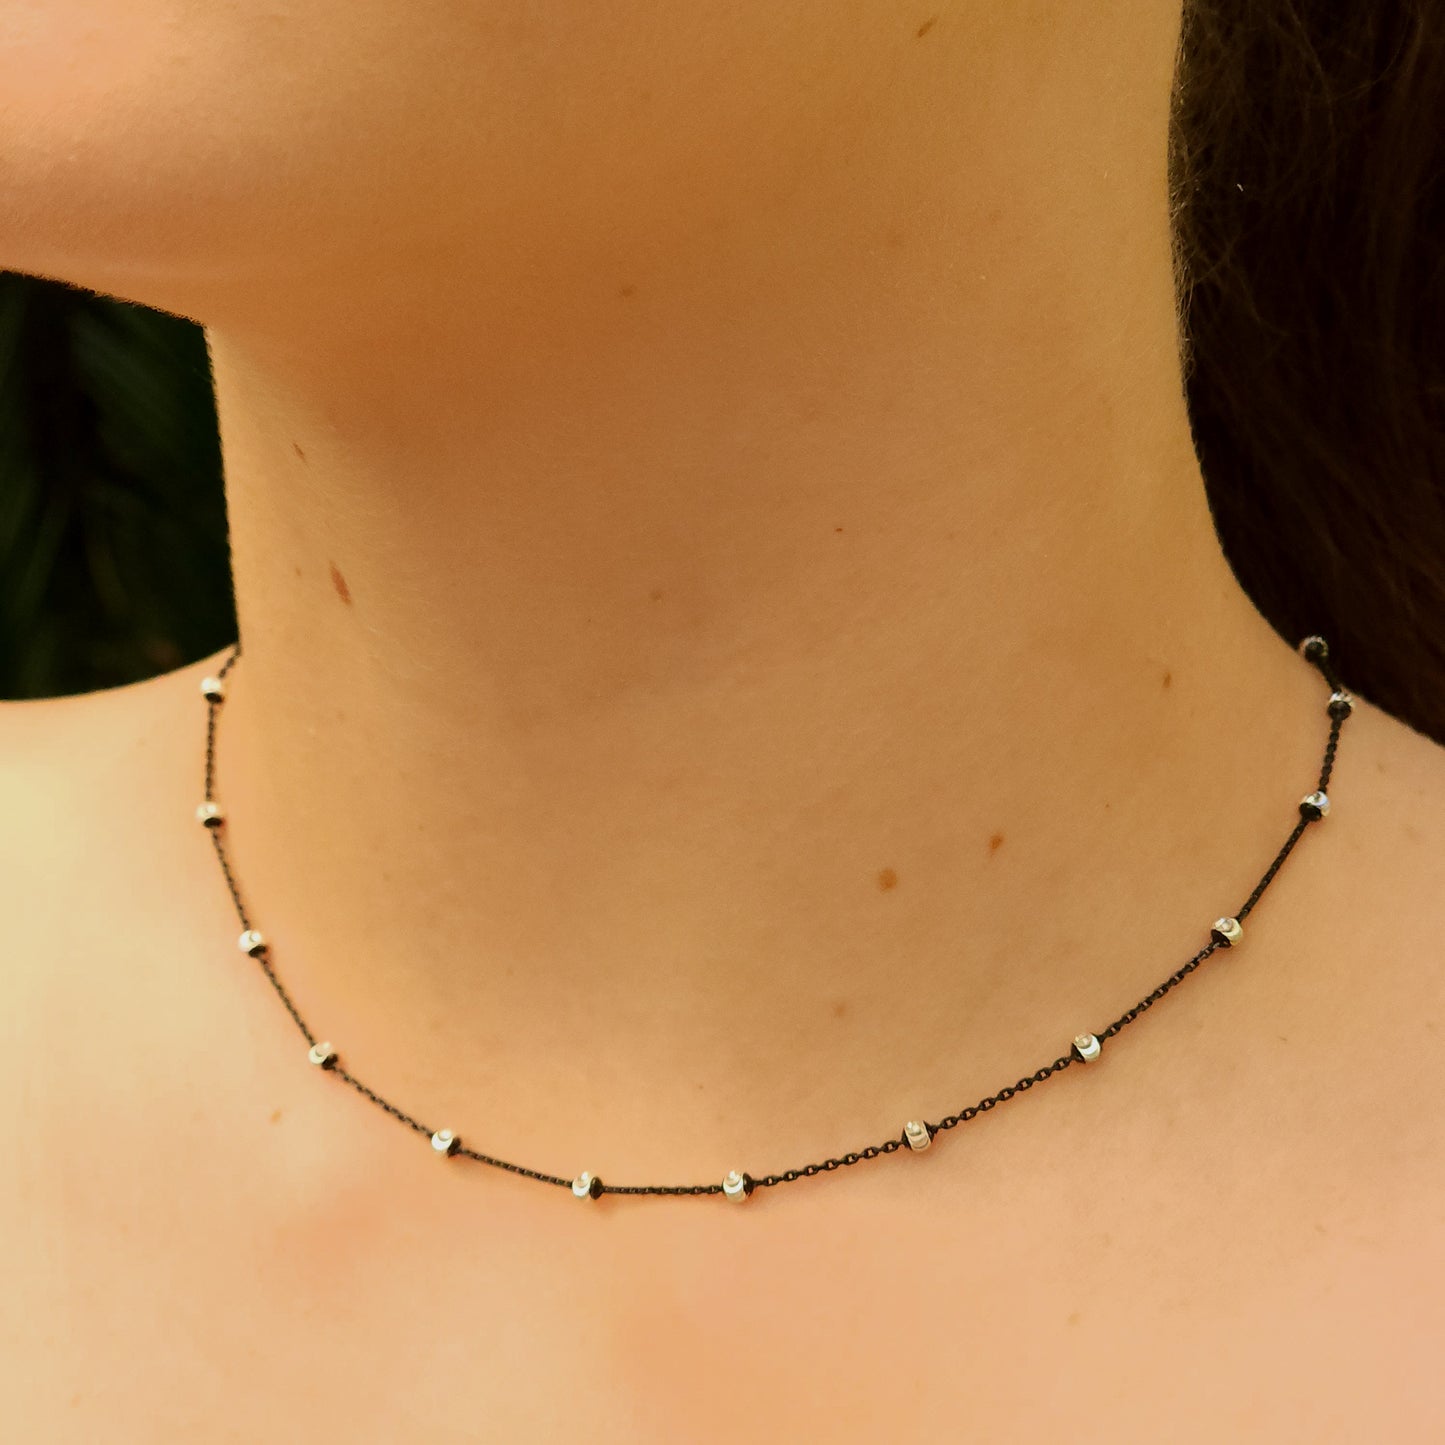 Ruthenium Plated Silver Chain with Beads